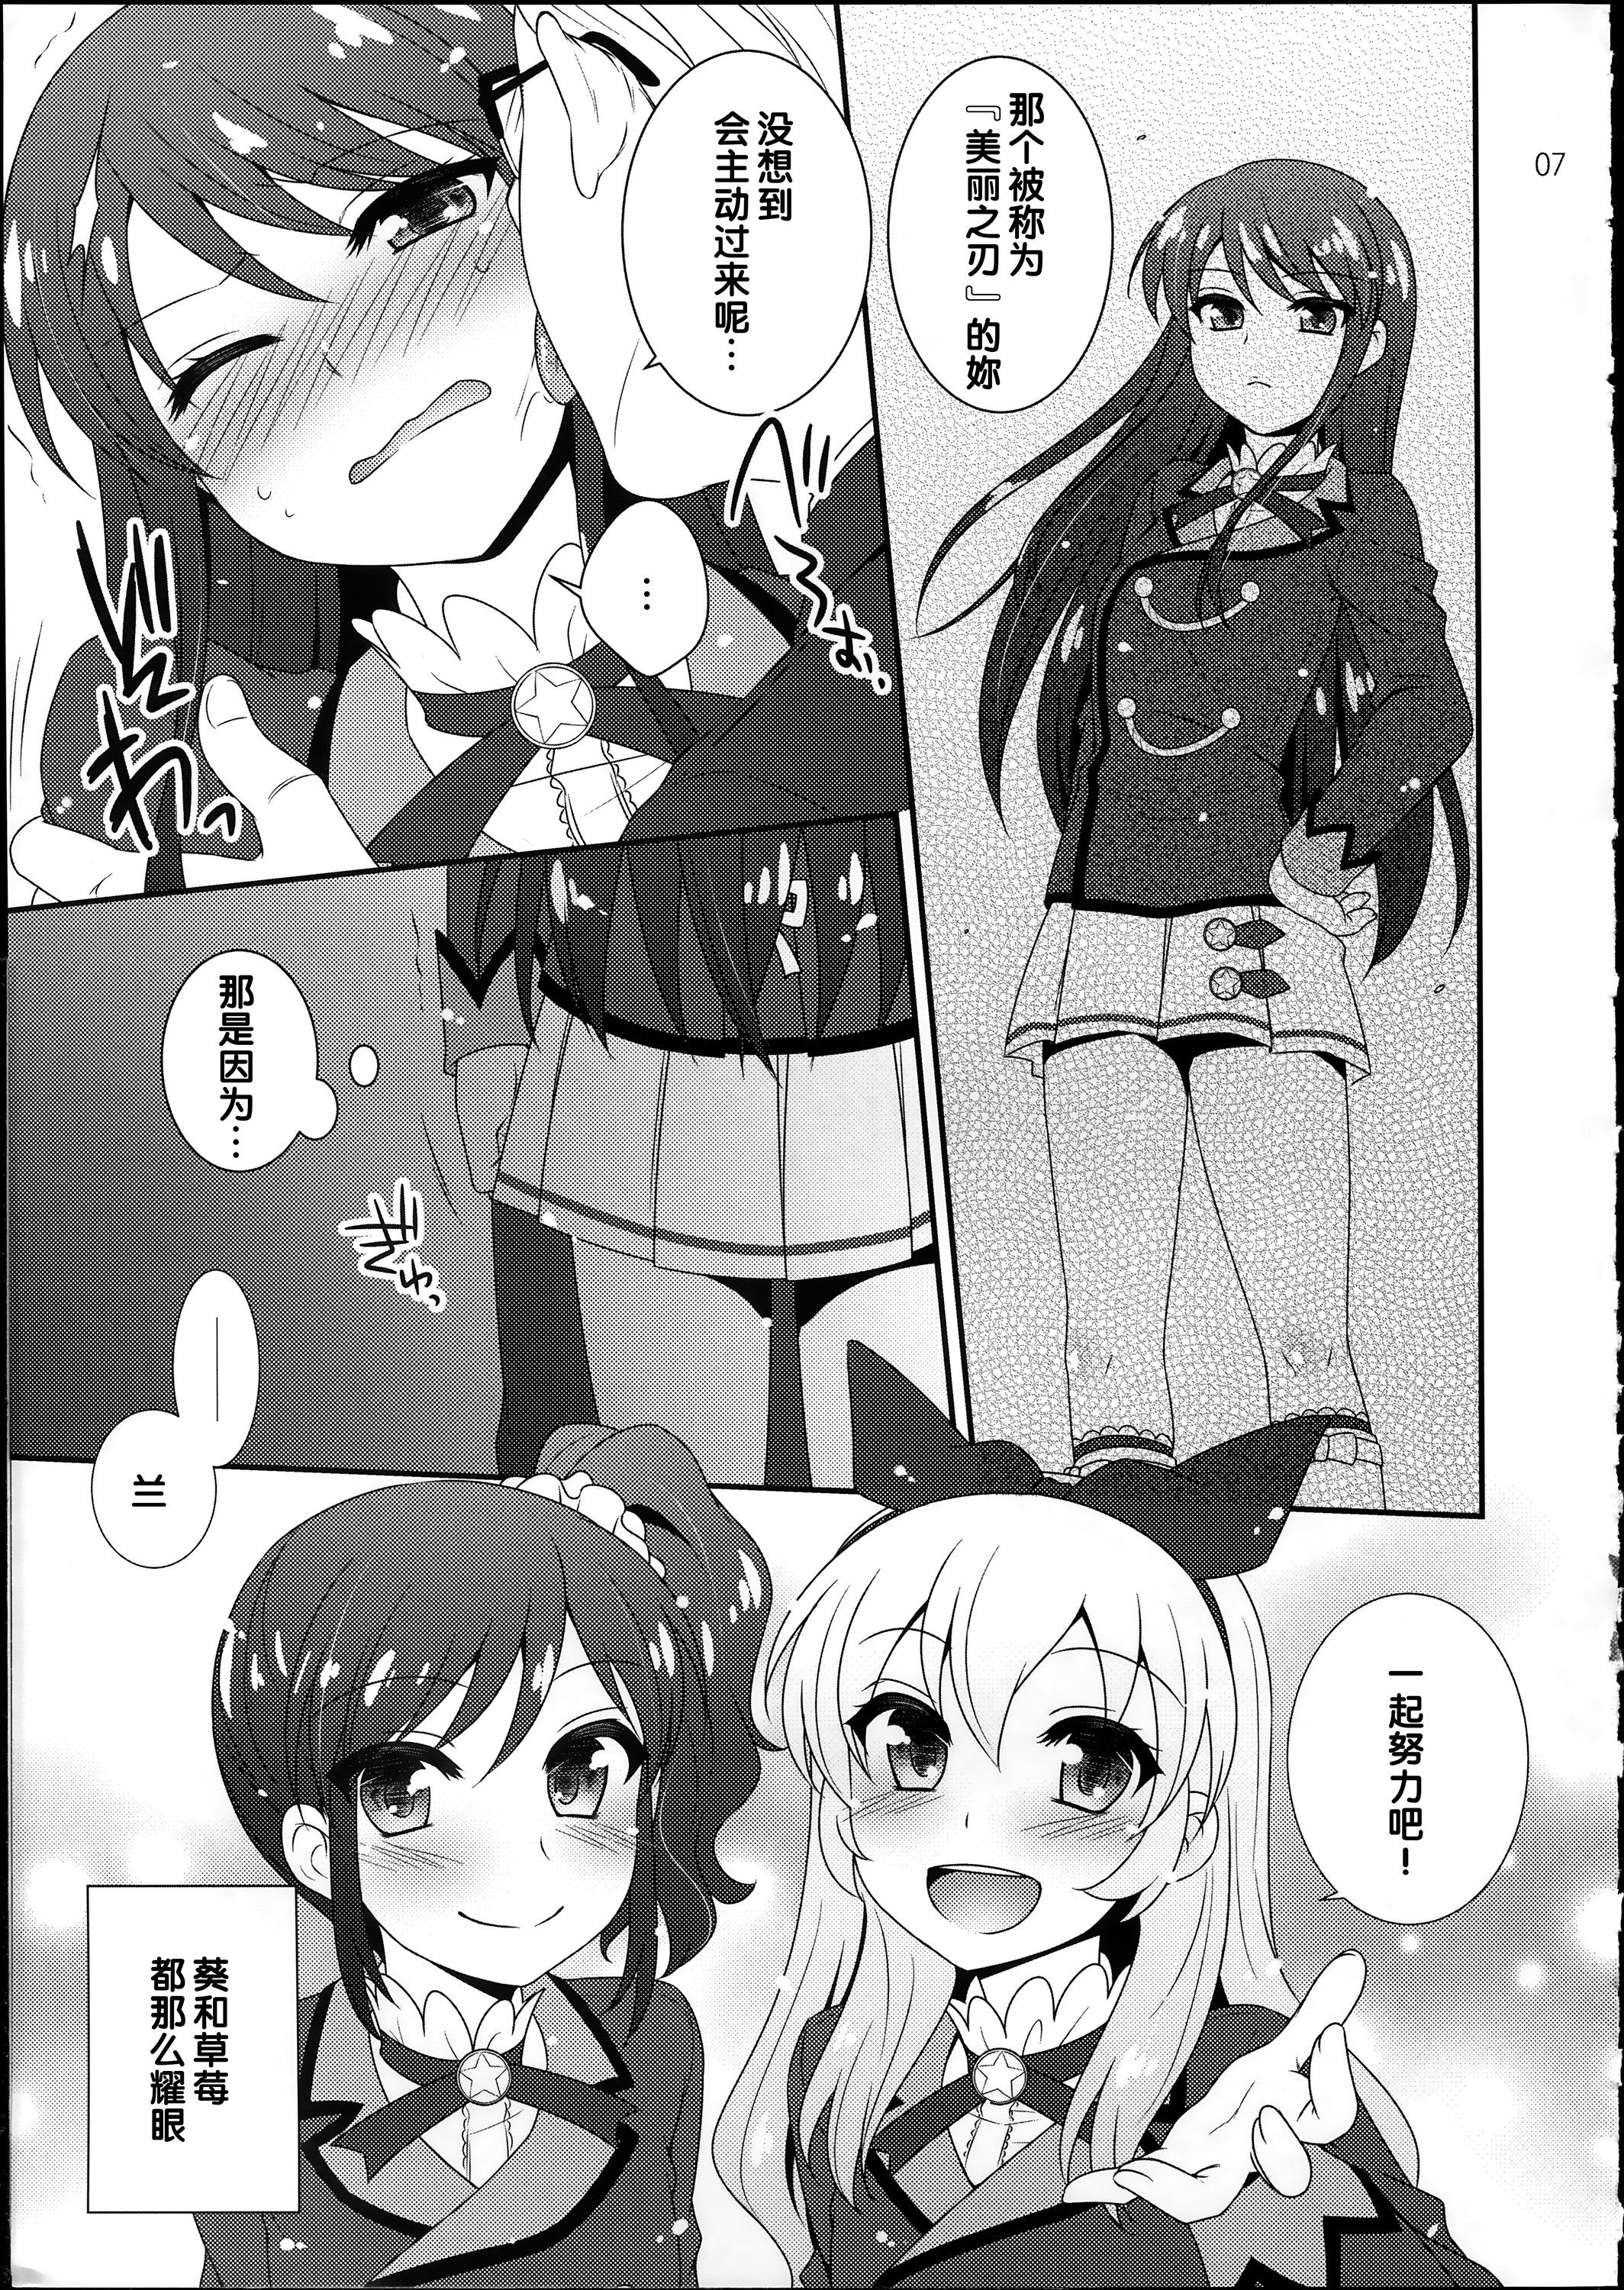 Spreading Tsukamitore! Golden Ran-Chance - Aikatsu Pussy To Mouth - Page 7